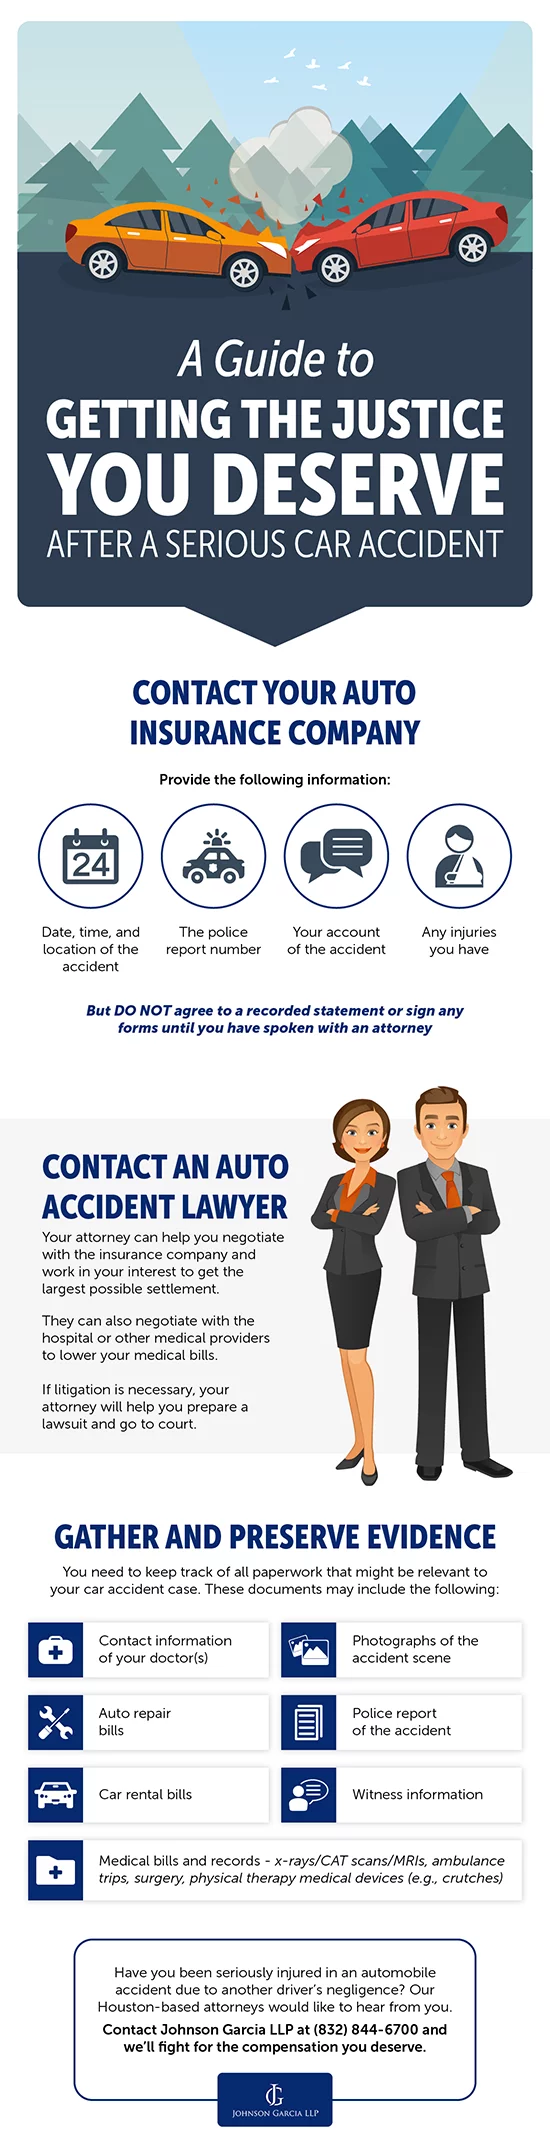 A Guide to Getting the Justice You Deserve After a Serious Car Accident